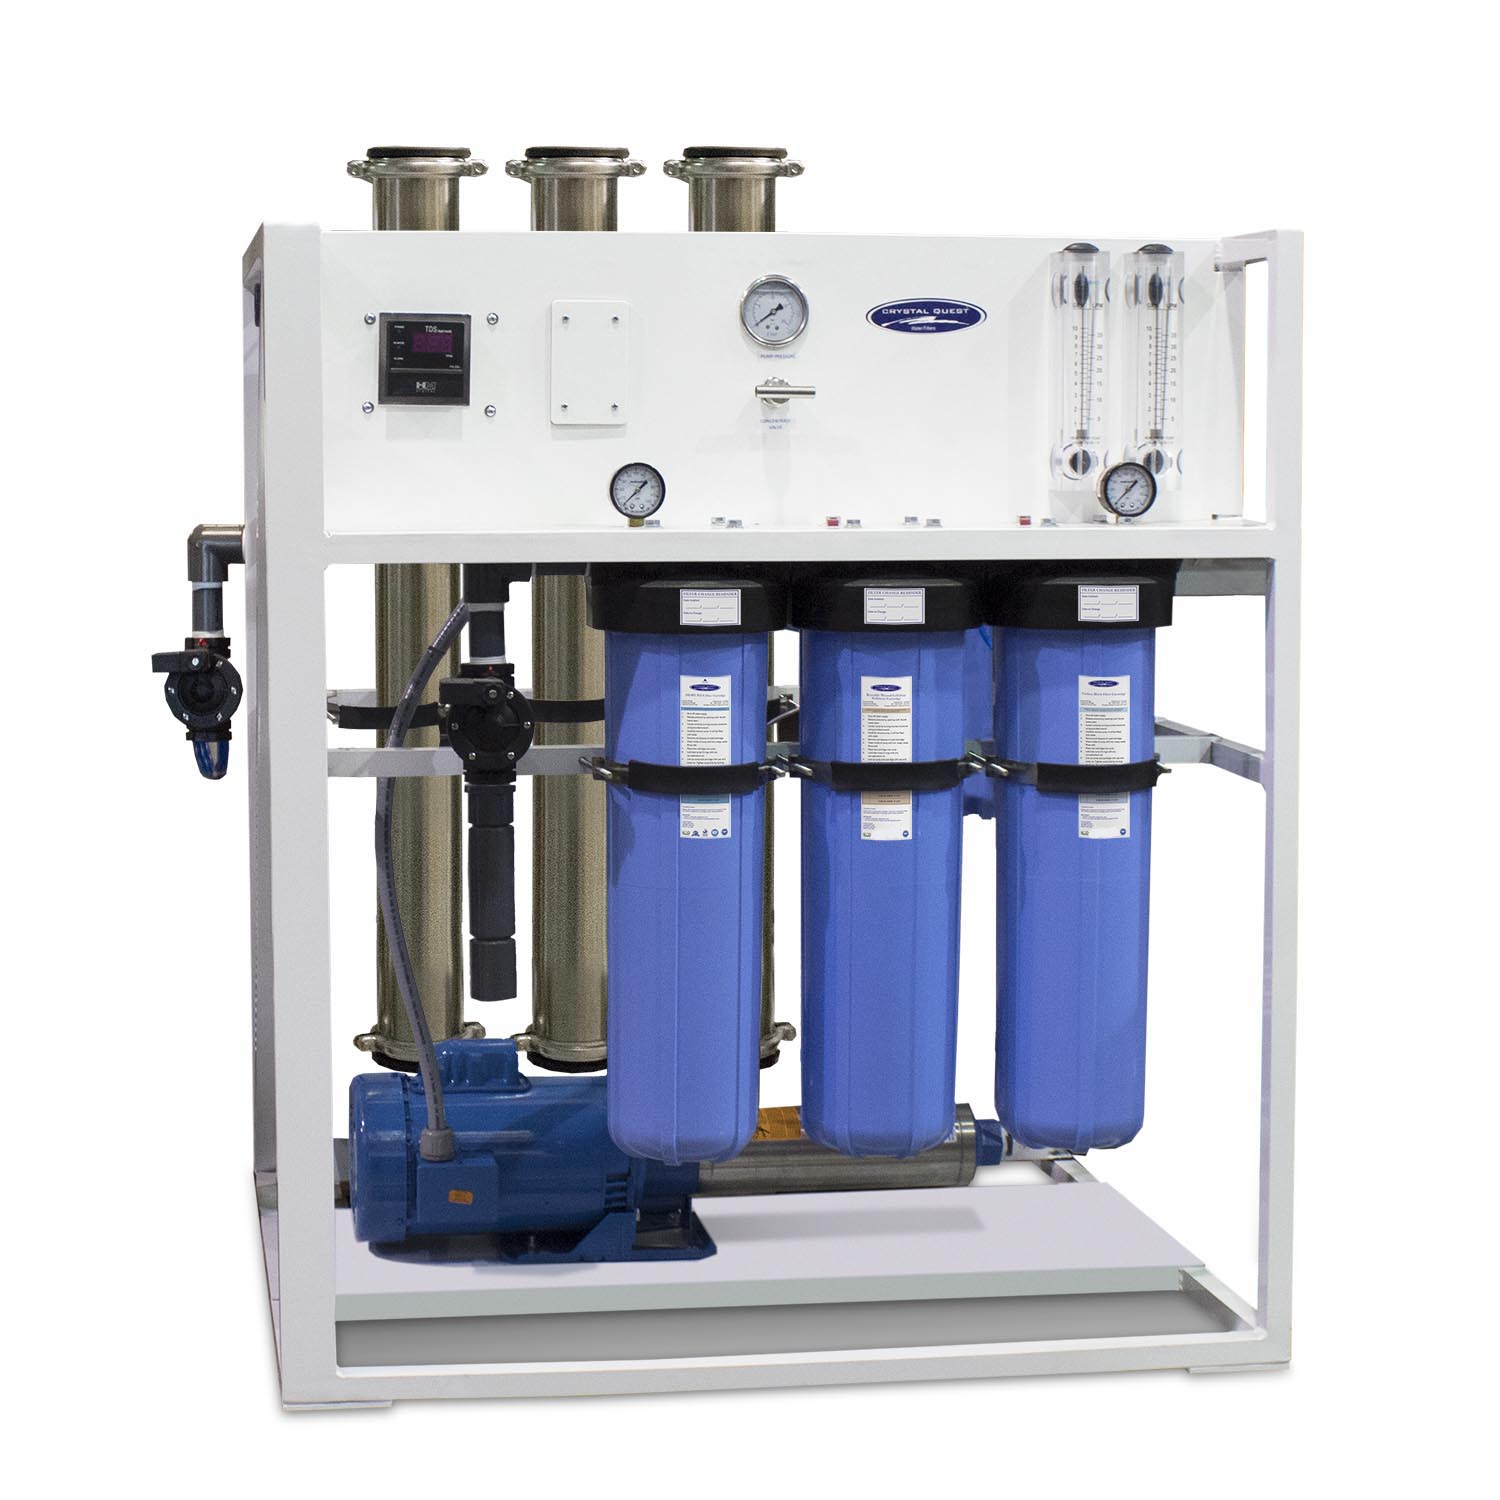 Medical Mid-Flow Reverse Osmosis System (500-7000 GPD) - Commercial - Crystal Quest